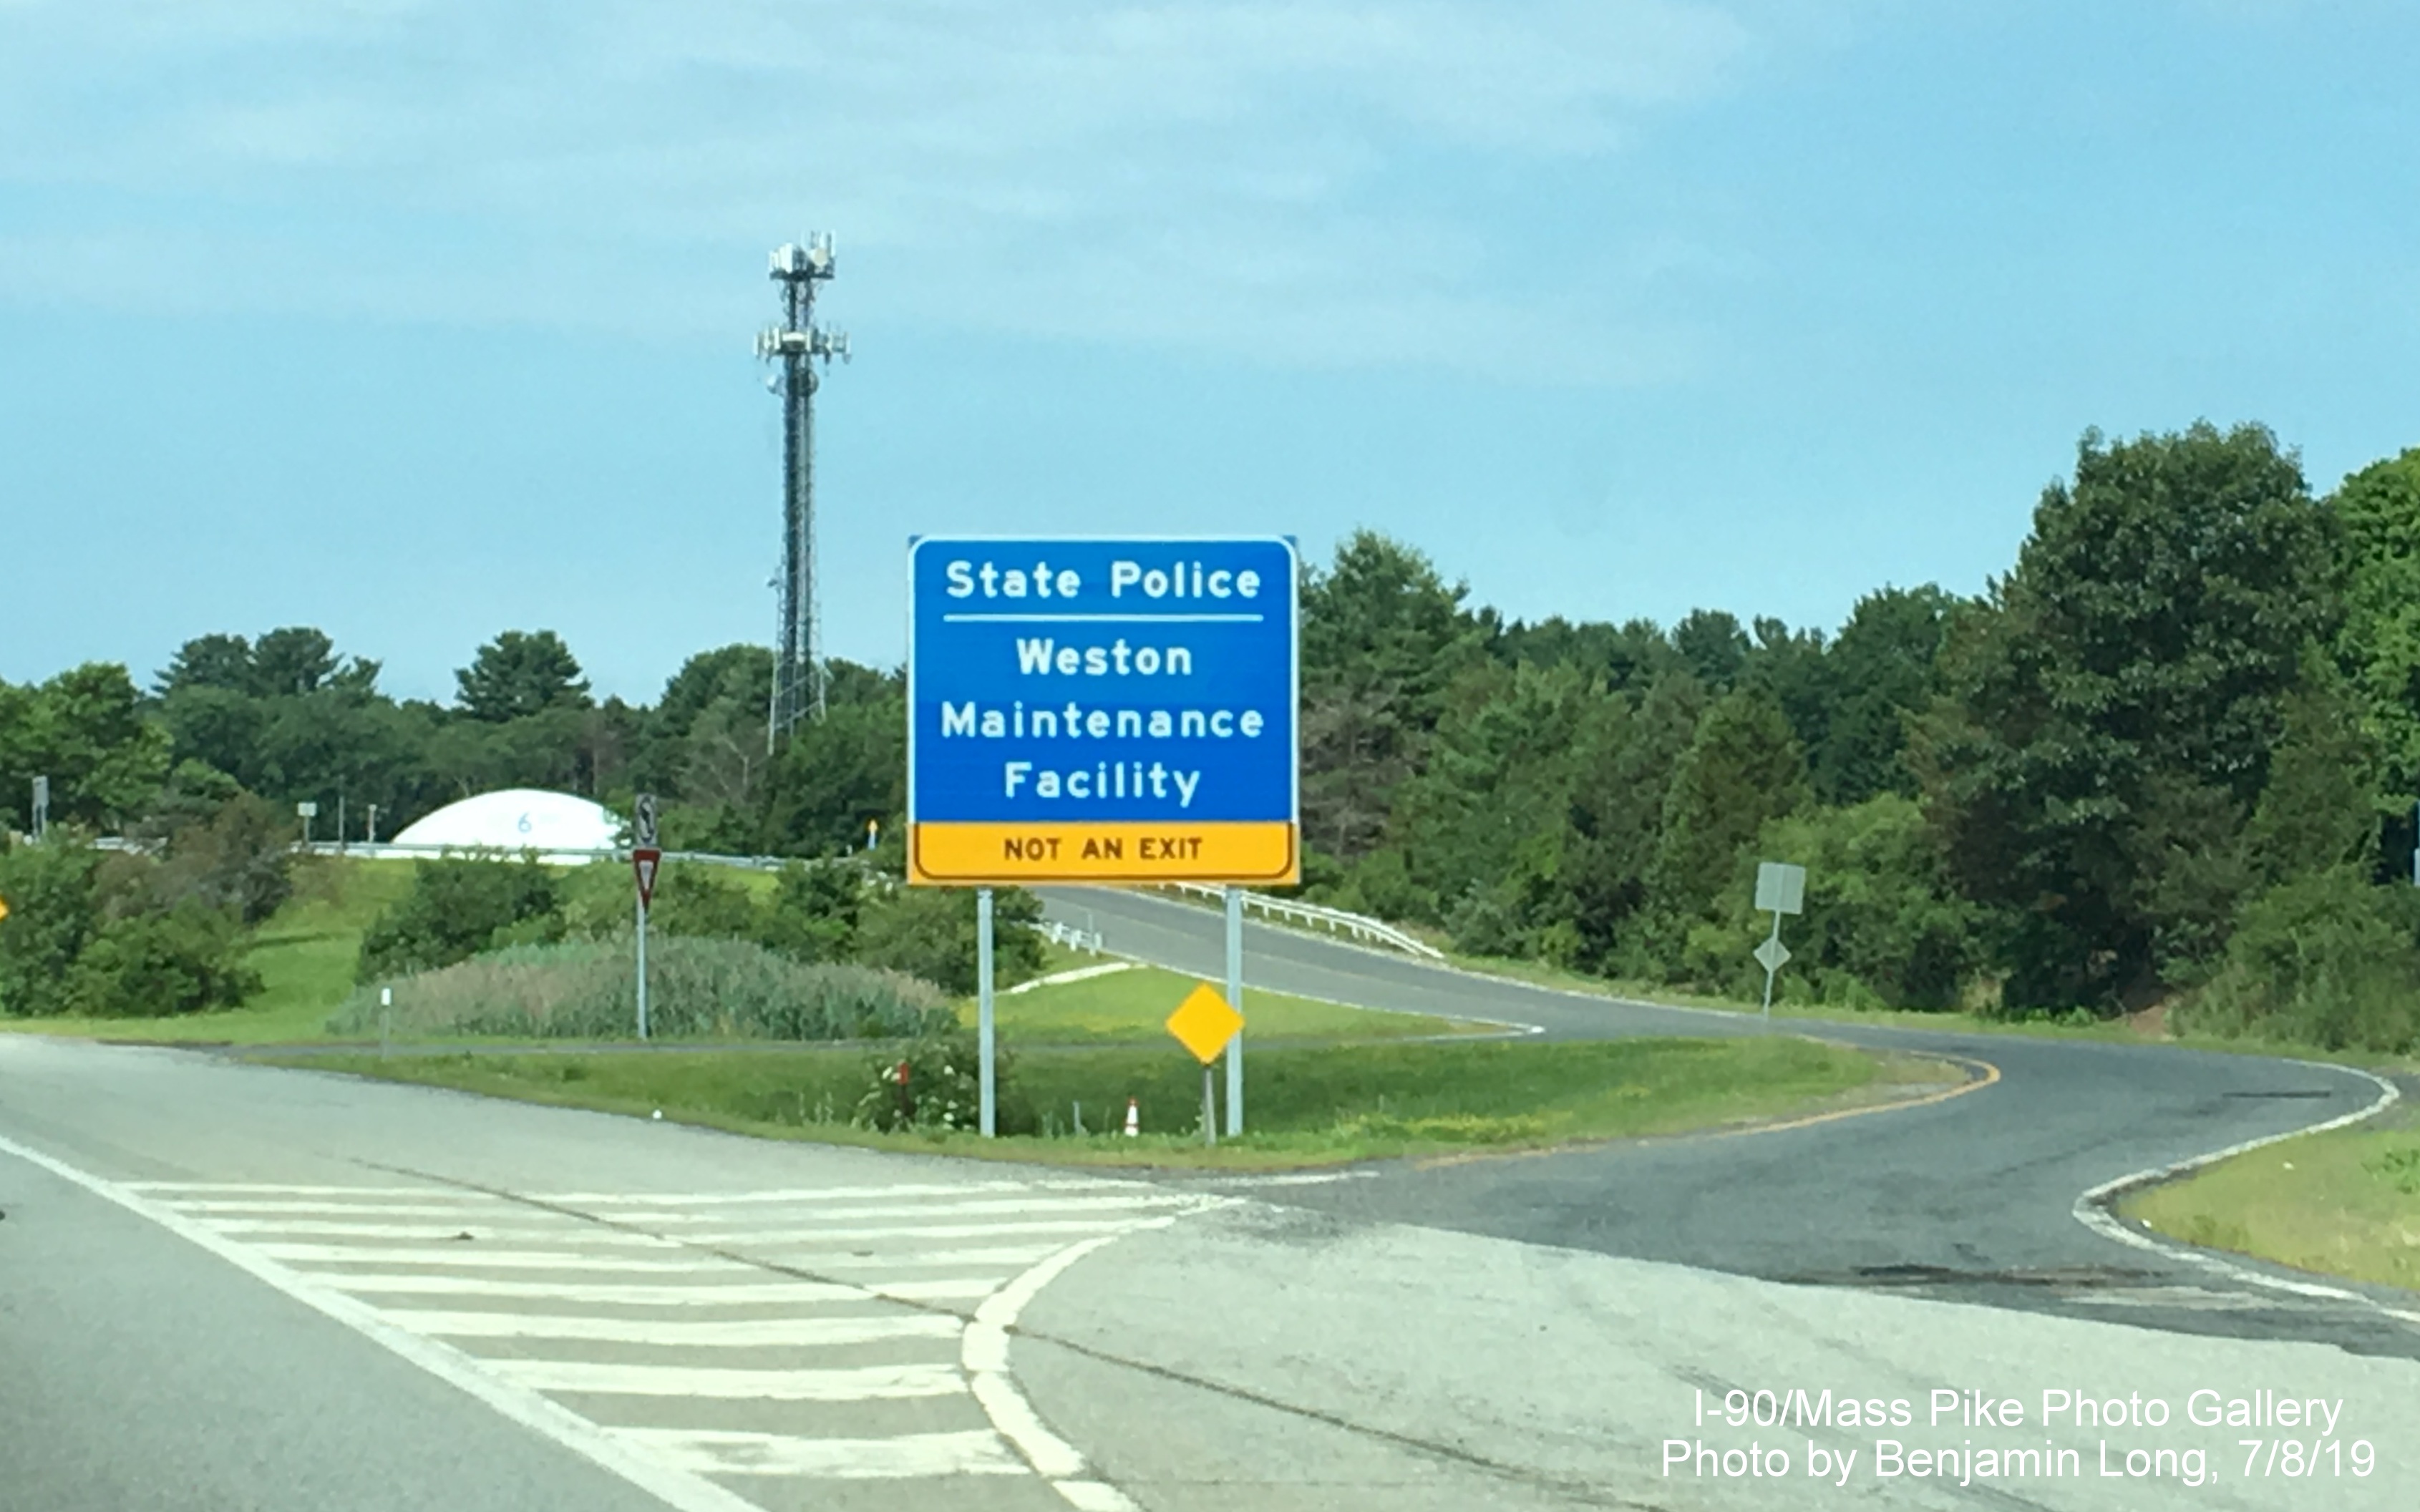 Image of newly placed blue advisory sign for entrance to Weston State Police Barracks/Maintenance
                                                   Facility on I-90/Mass Pike West, by Benjamin Long